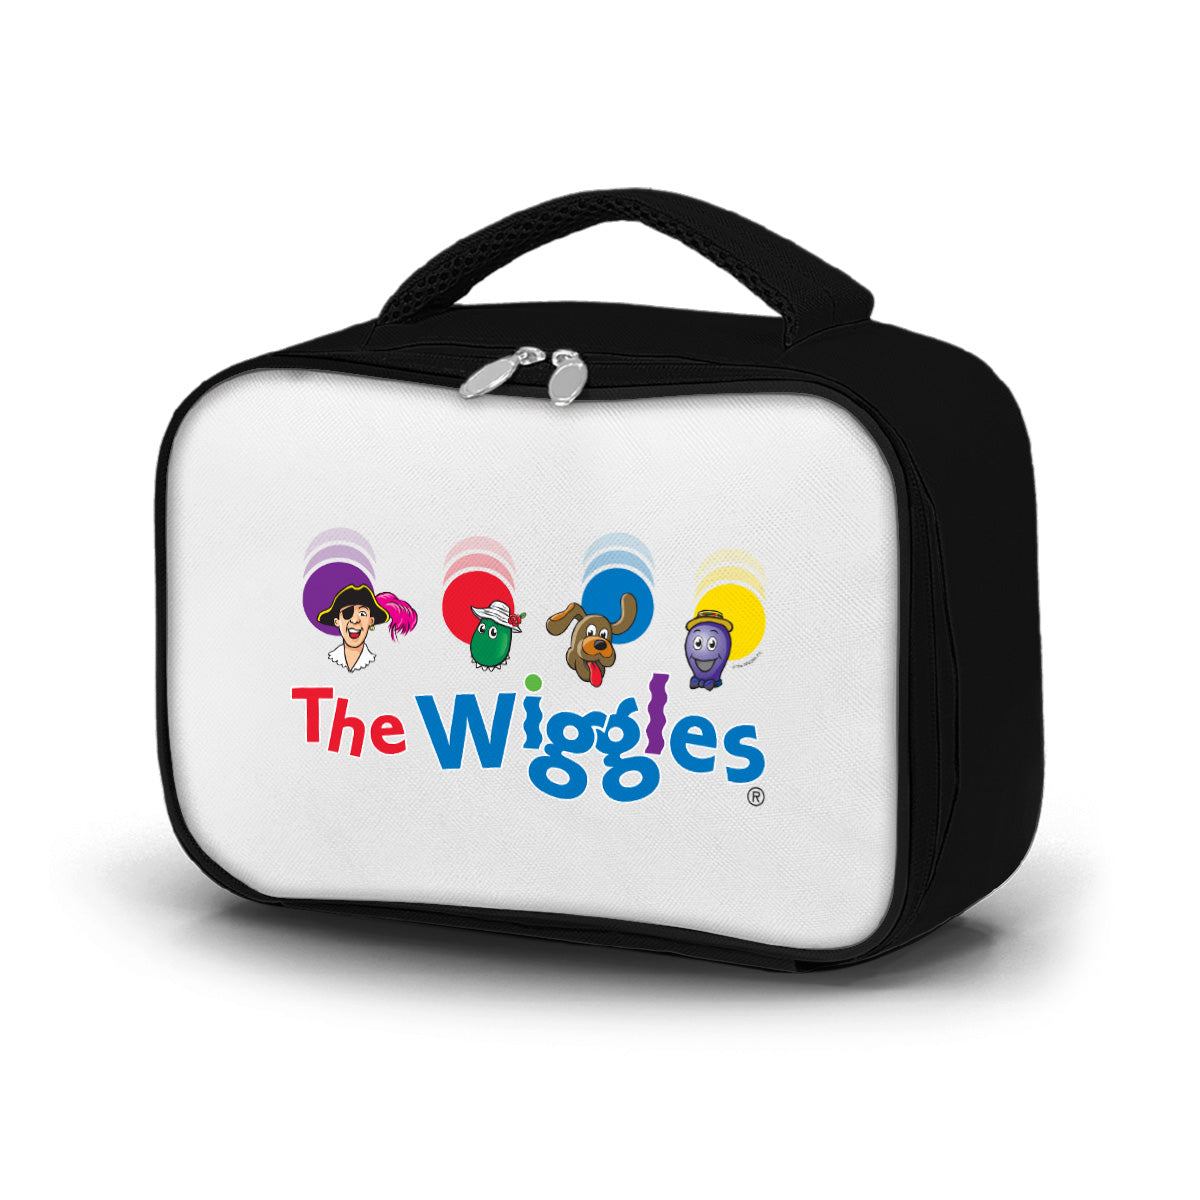 The Wiggles Original Friends Lunch Cooler